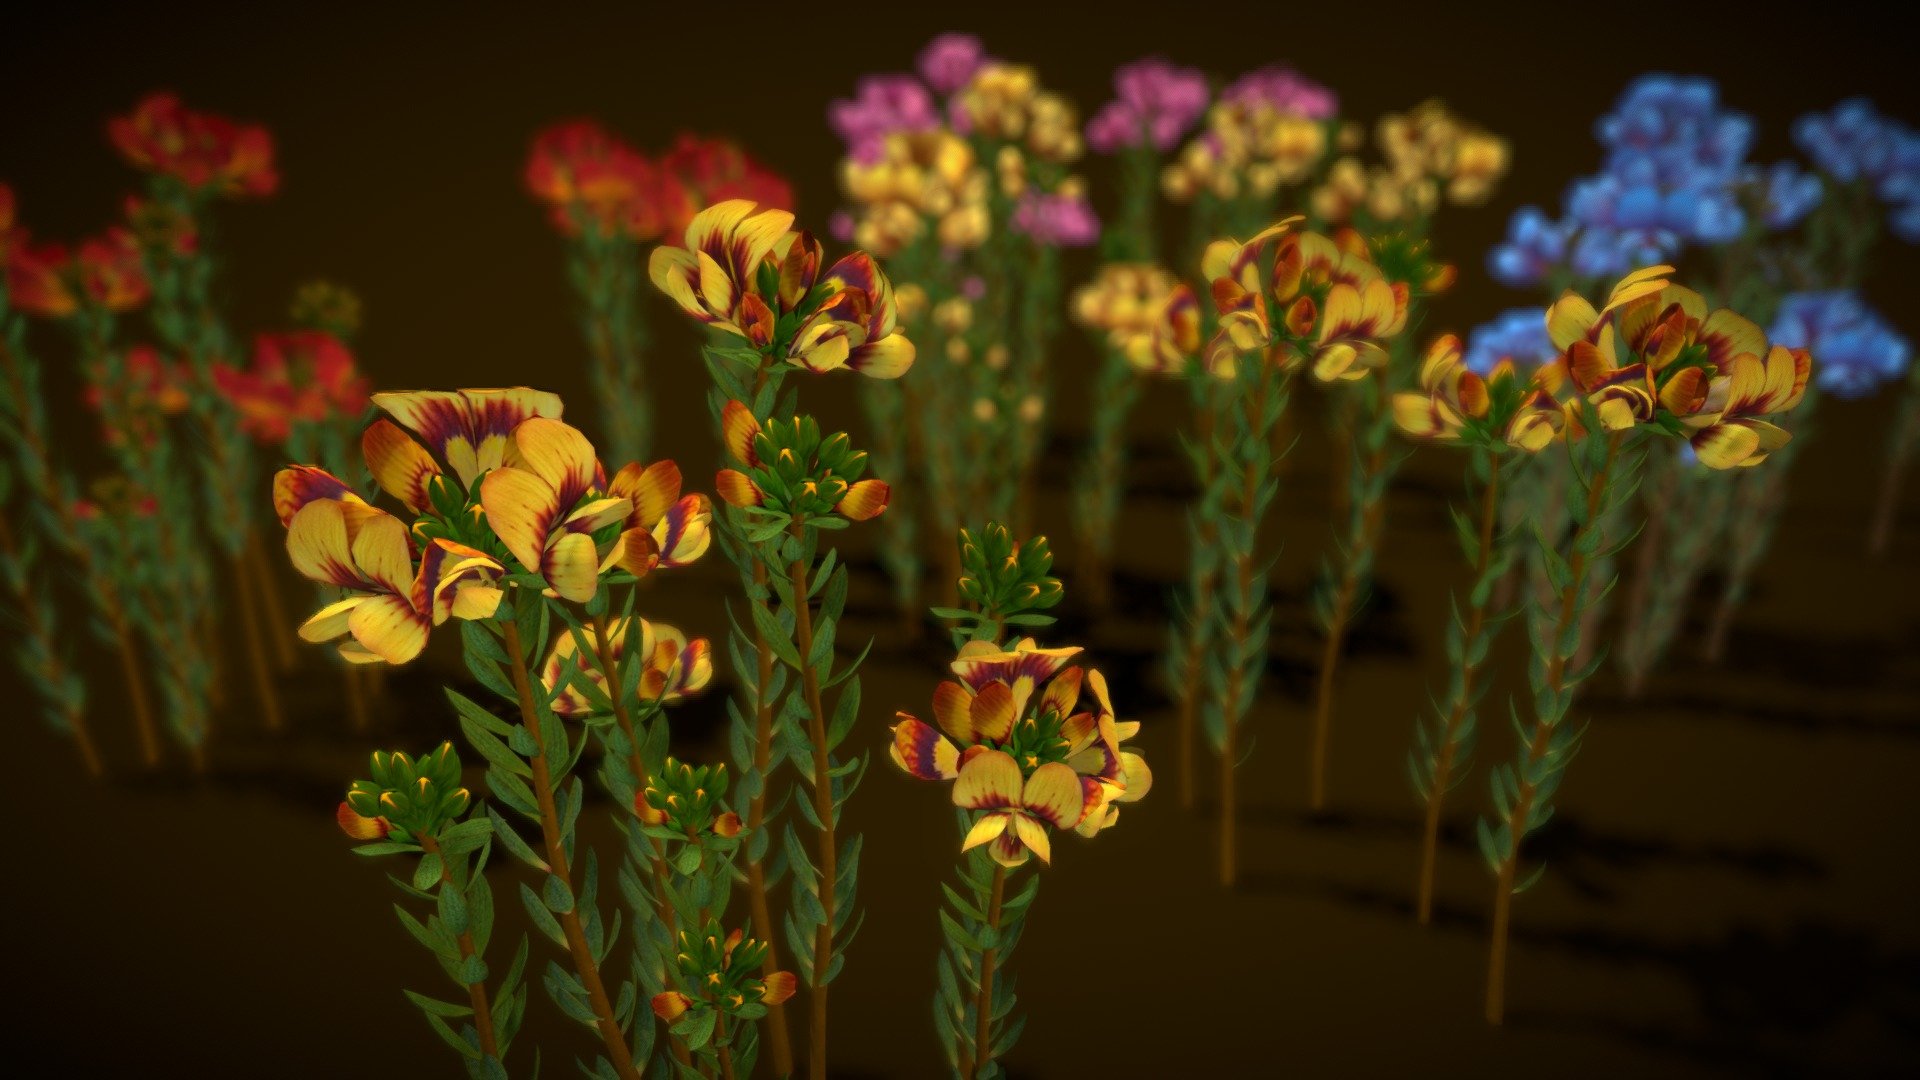 HIGH QUALITY Flower optimized for Unity game engine!

Mobile Optimize Scene This is model 3D Flower Almaleea Subumbellata in the Big Pack (Cartoon Flower Colections) with over 5 types color!

All objects are ready to use in your visualizations. 

-1024x1024, texture maps 

-Poly Count : Average 100930 polys /98695 verts/ 185688 Tris - Flower Almaleea Subumbellata - Buy Royalty Free 3D model by vustudios 3d model